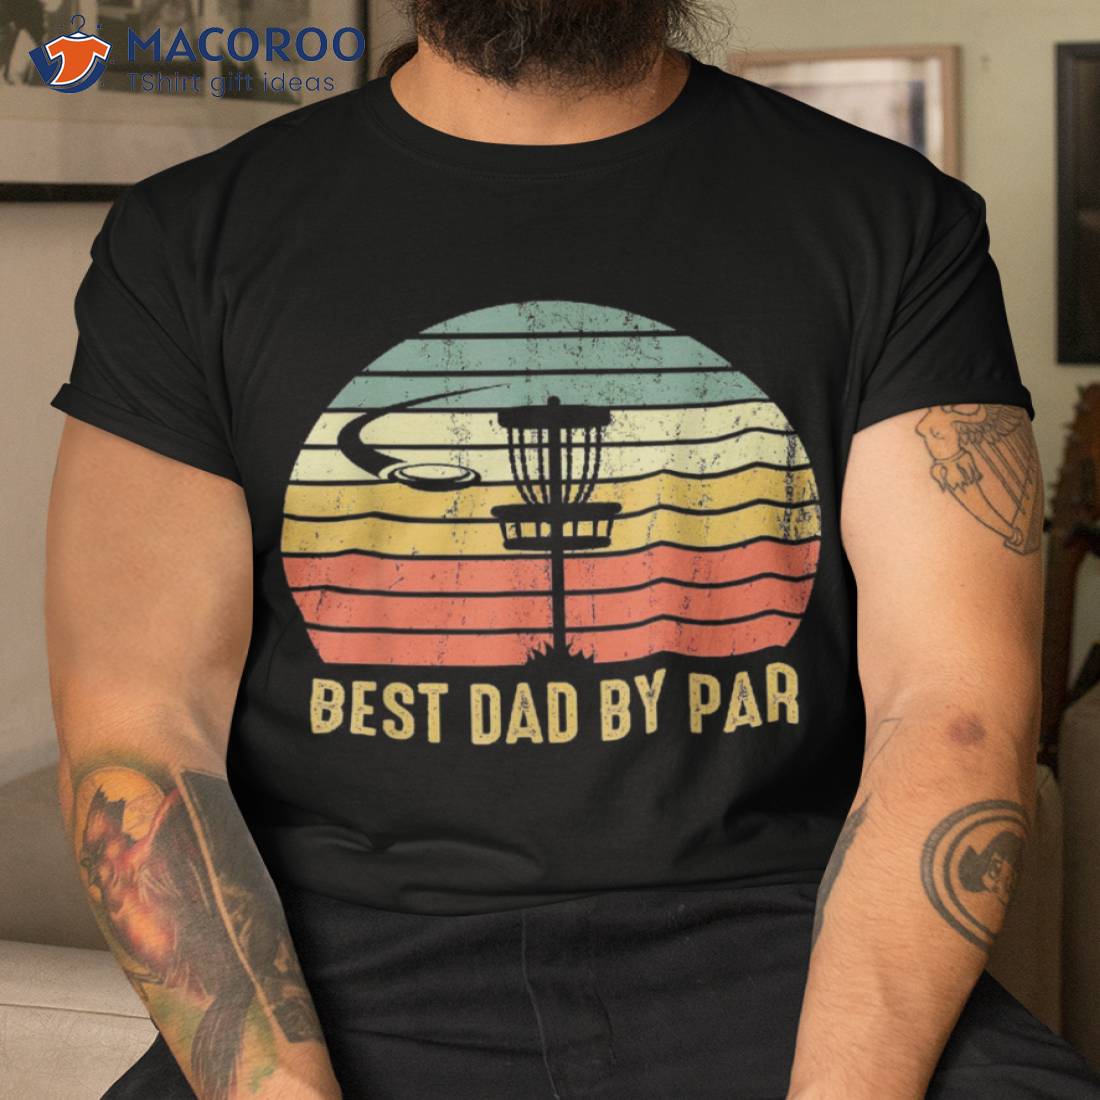 https://images.macoroo.com/wp-content/uploads/2023/06/best-dad-by-par-funny-disc-golf-gifts-vintage-father-s-day-shirt-tshirt.jpg